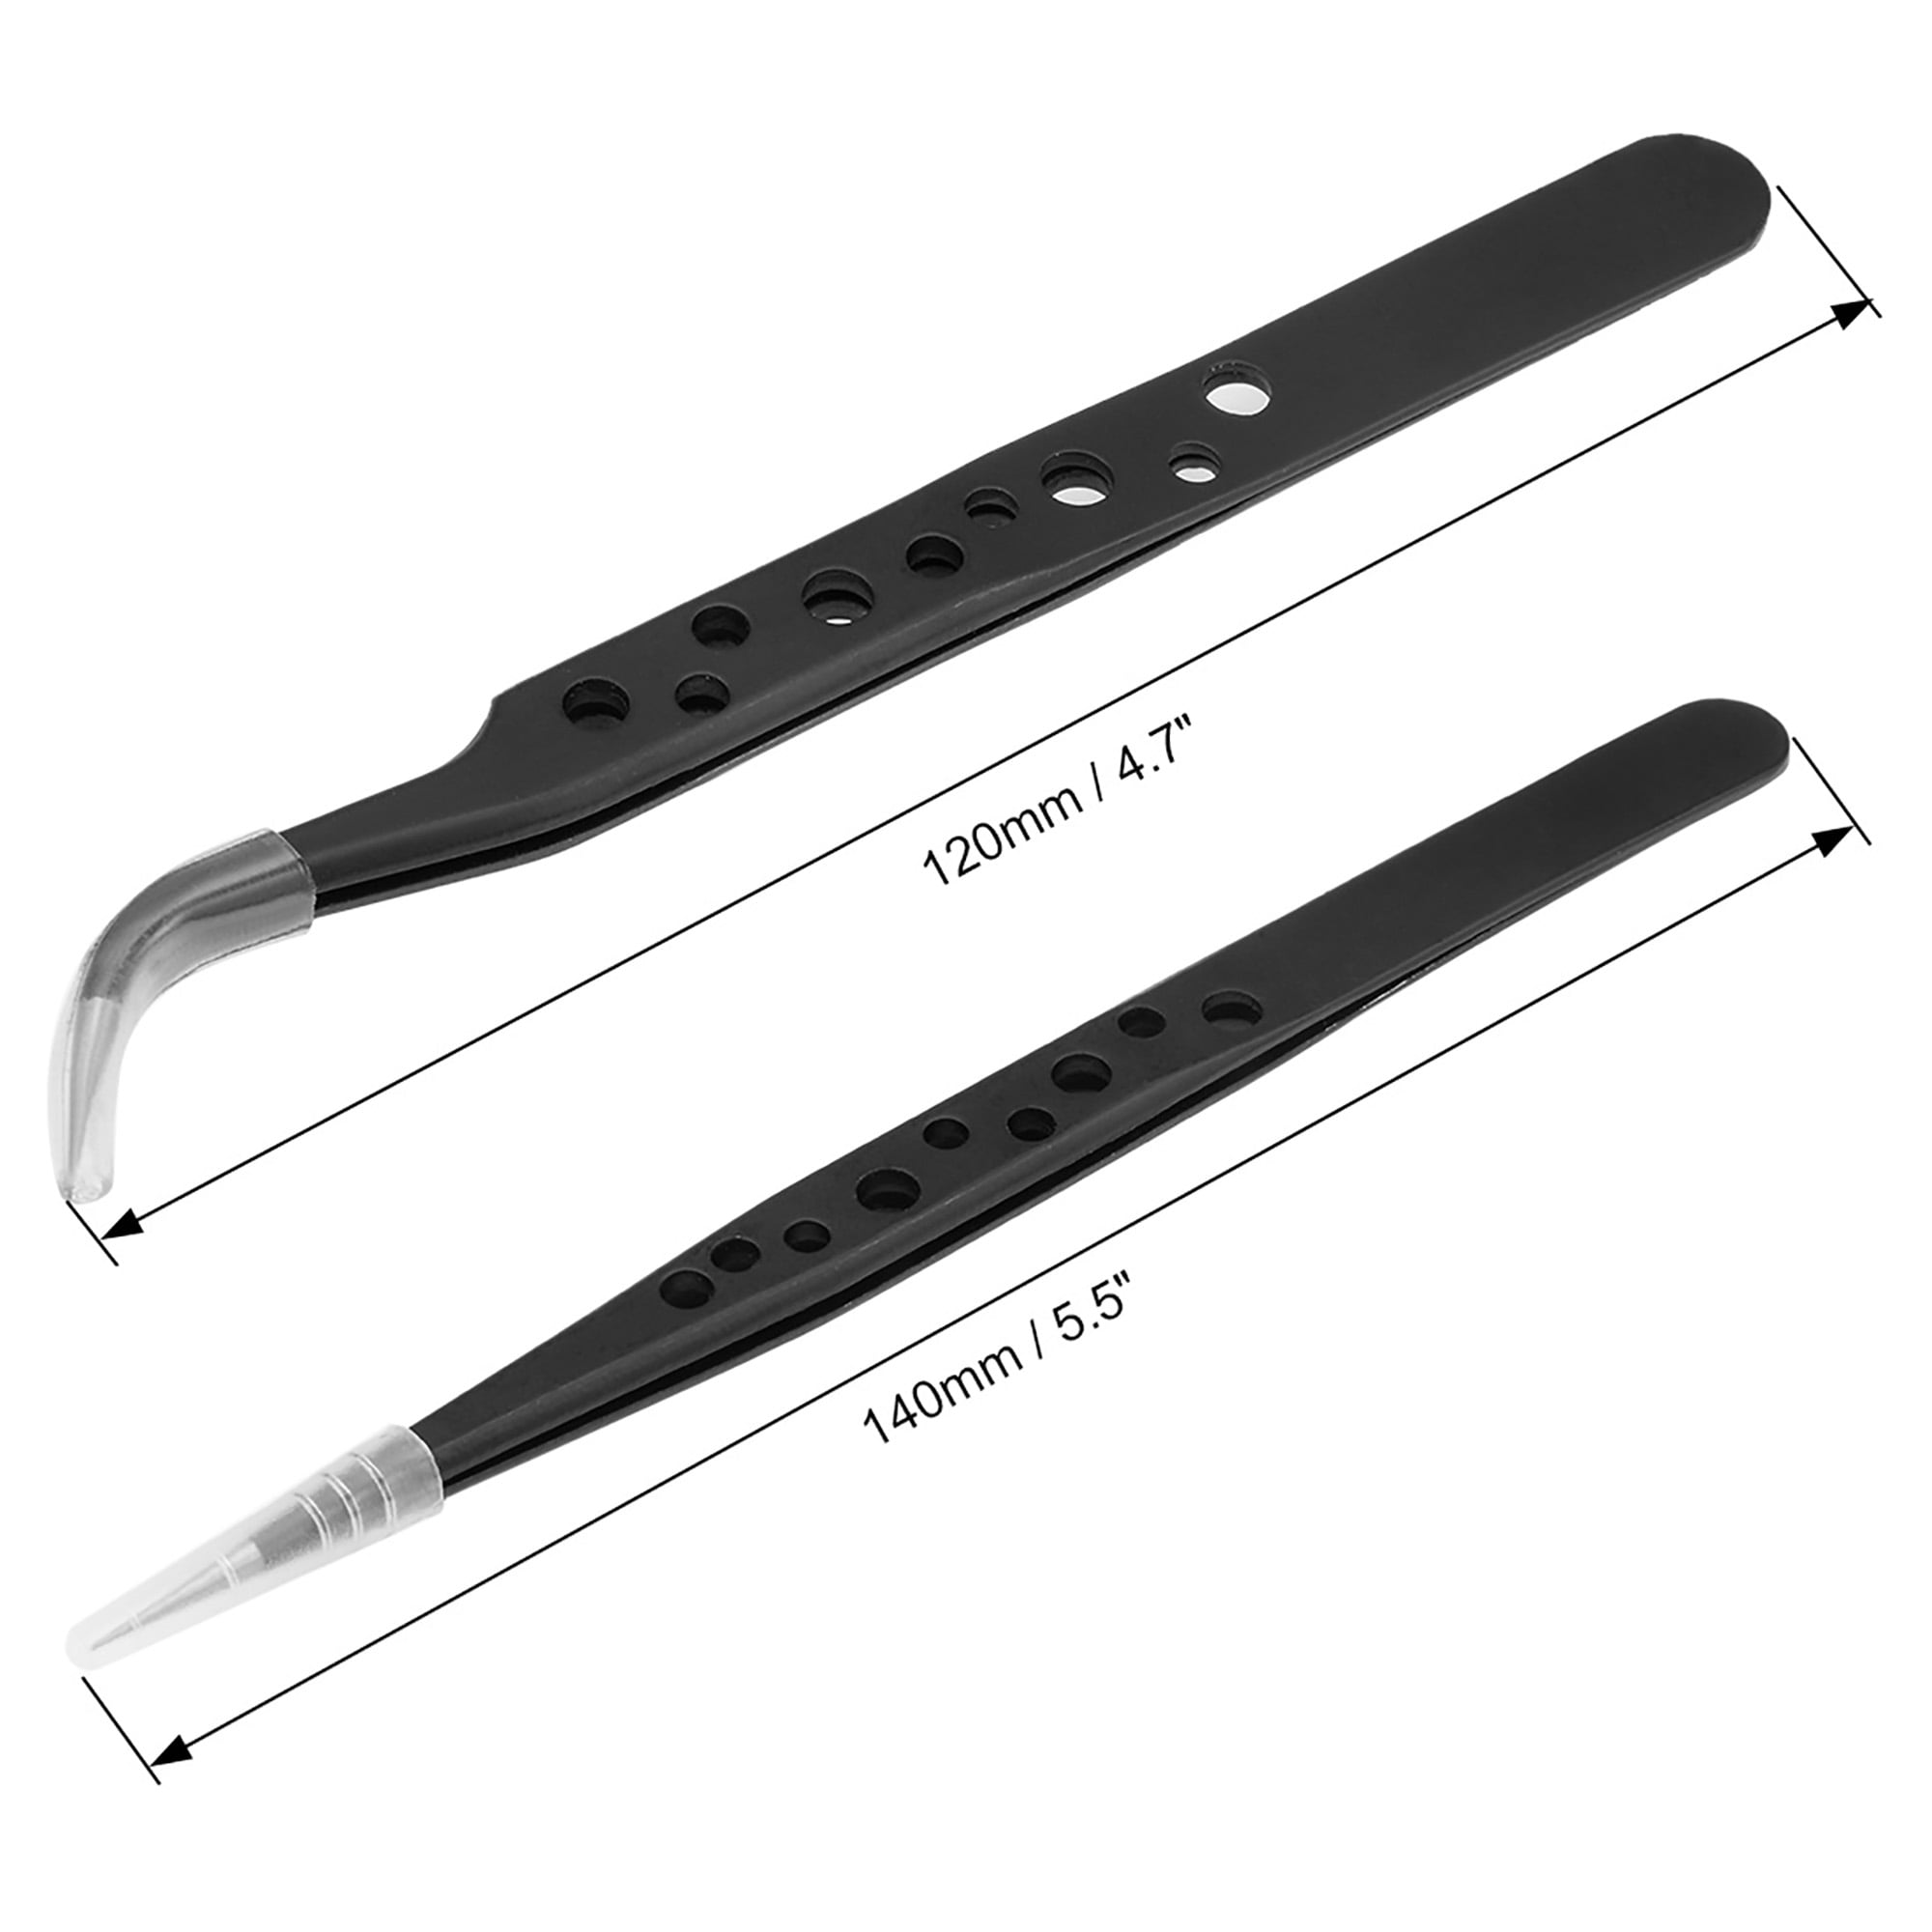  Craft tweezers Precision Ceramic Tweezers Anti-Static Stainless  Steel Handle High Temperature Resistant Electronic Industrial Ceramic  Tweezers Hobby tools (Size : Little Curved) : Tools & Home Improvement